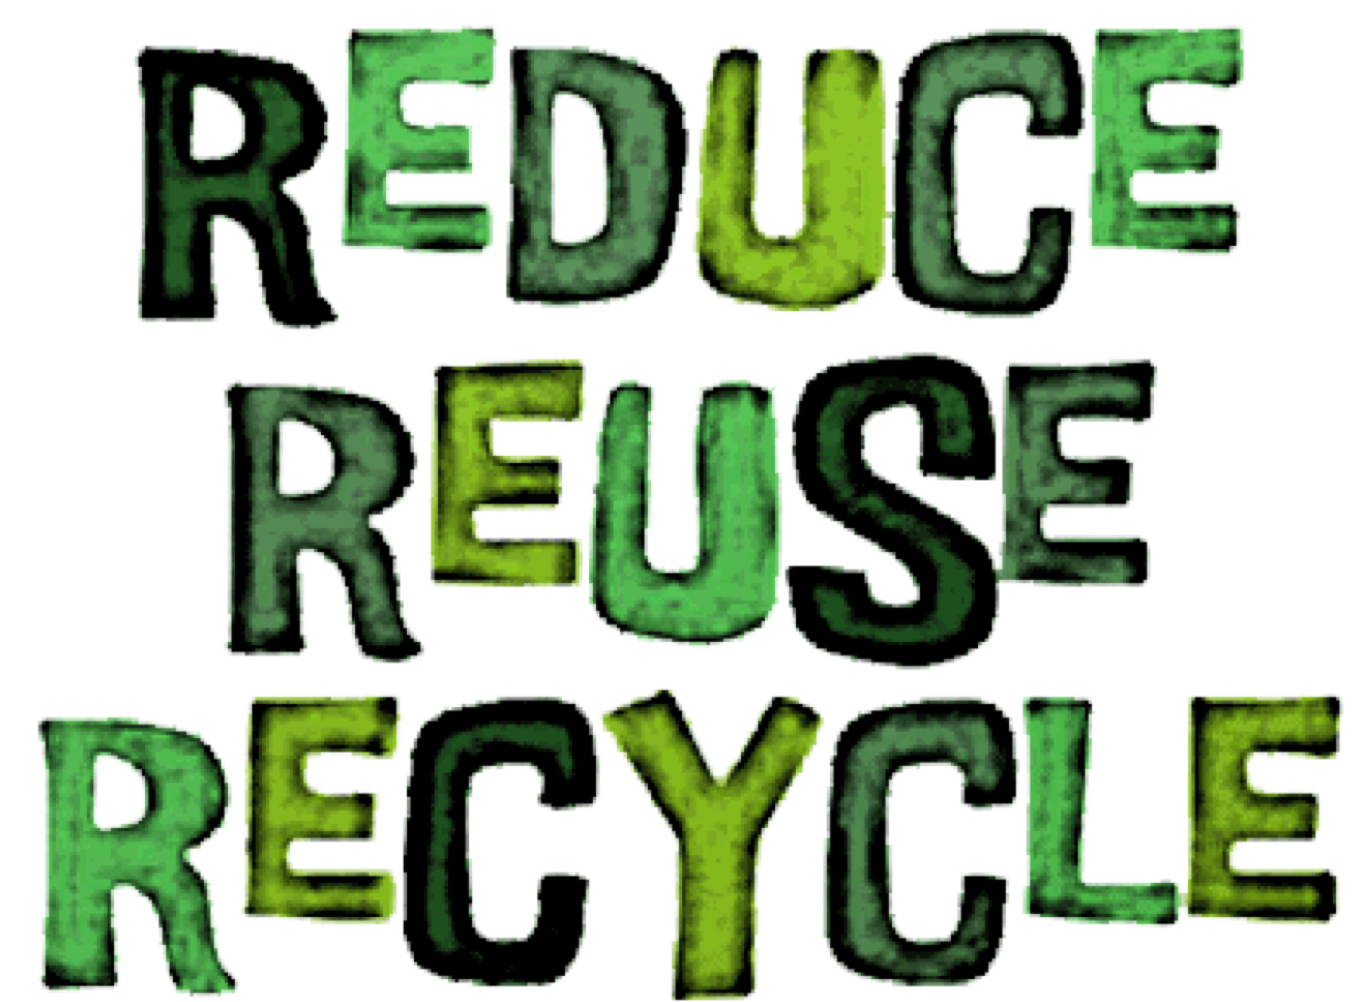 Reduce рисунок. 3r reduce reuse recycle. Eco Team. Eco friendly. Reduce mean